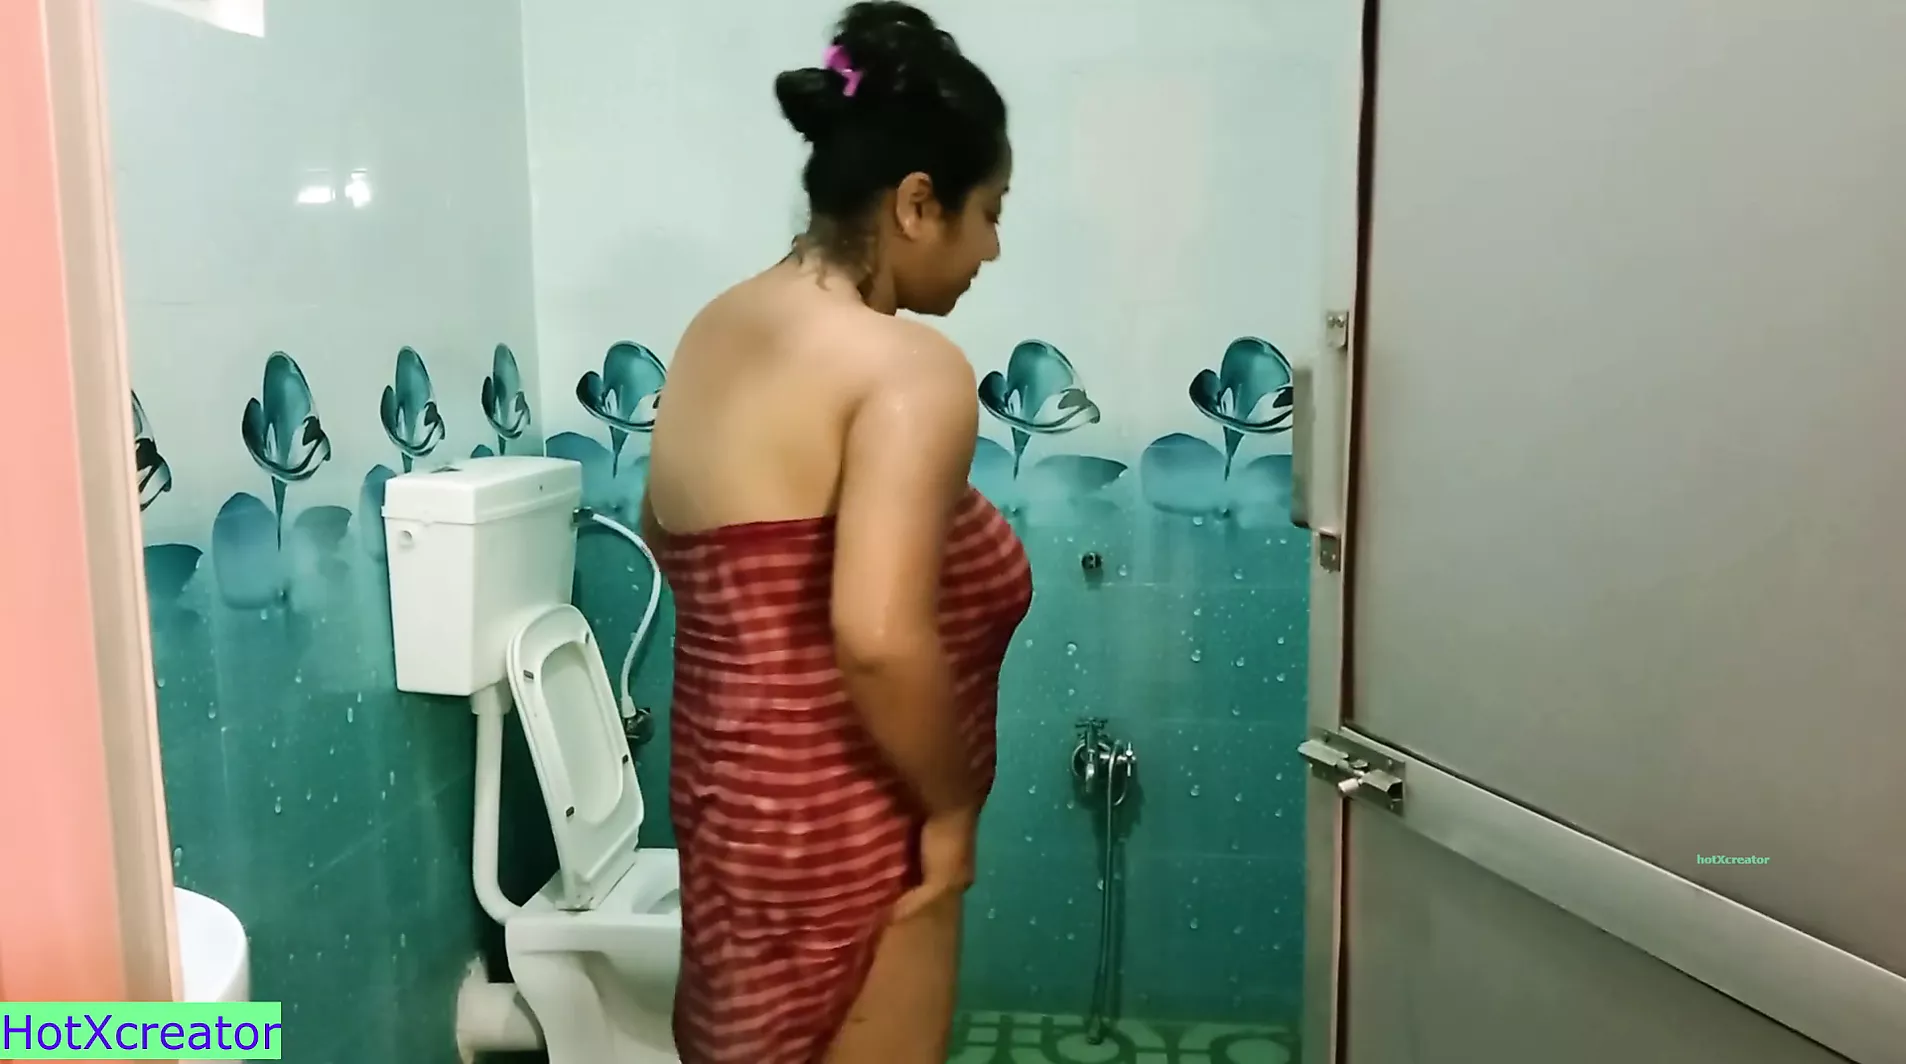 Indian hot Big boobs wife cheating room dating sex!! Hot pic image